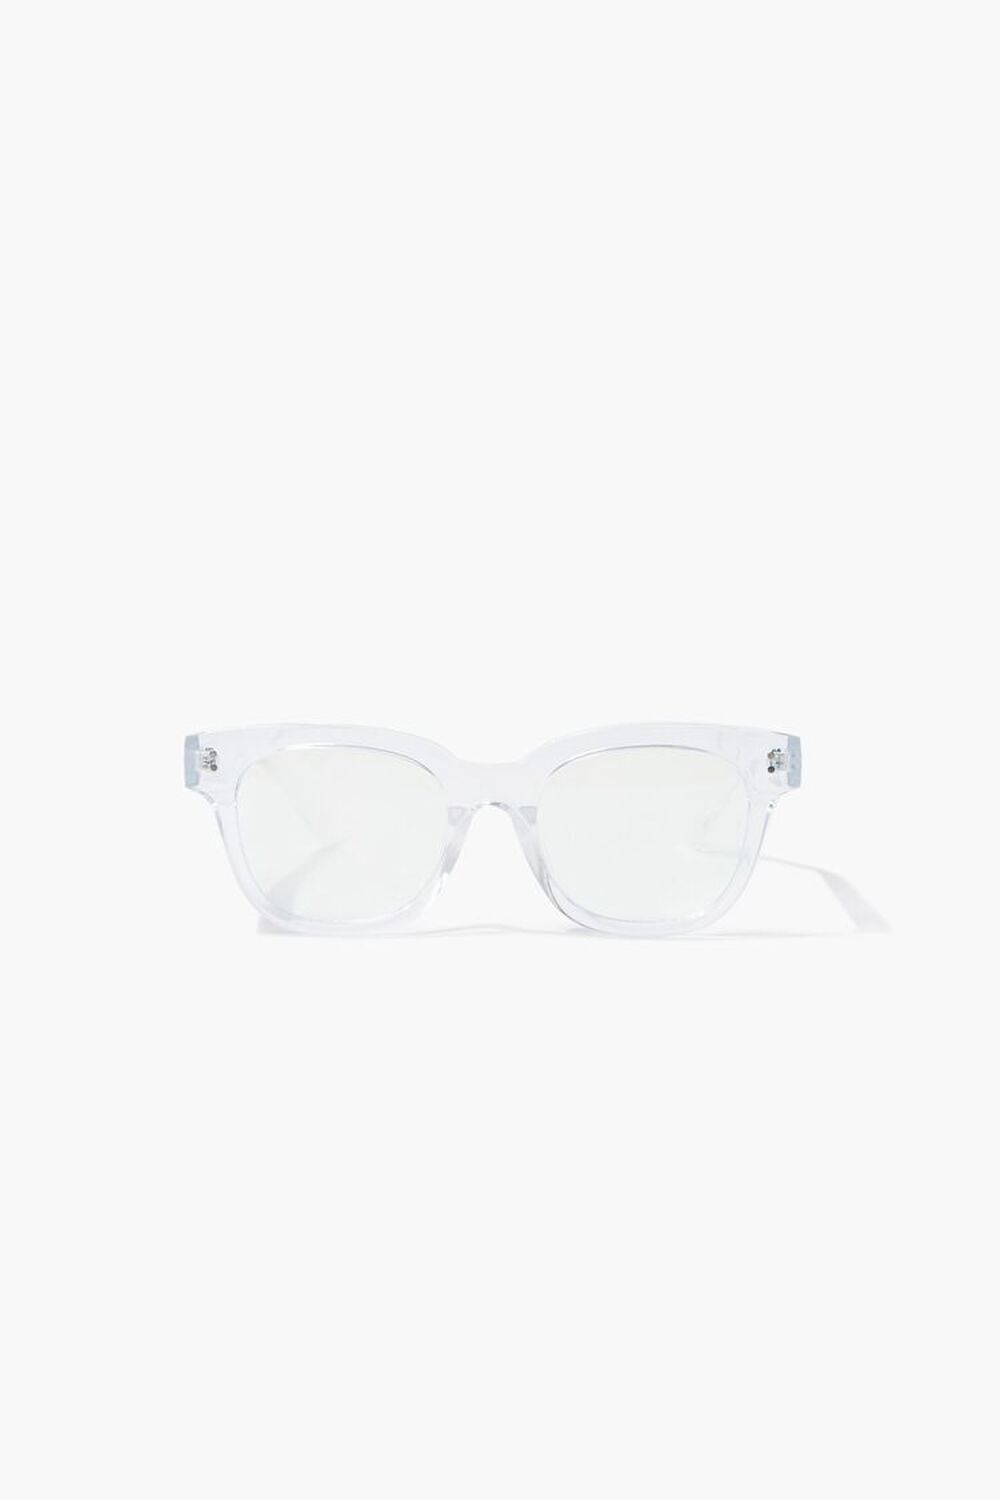 CLEAR/CLEAR Blue Light Reader Glasses, image 3